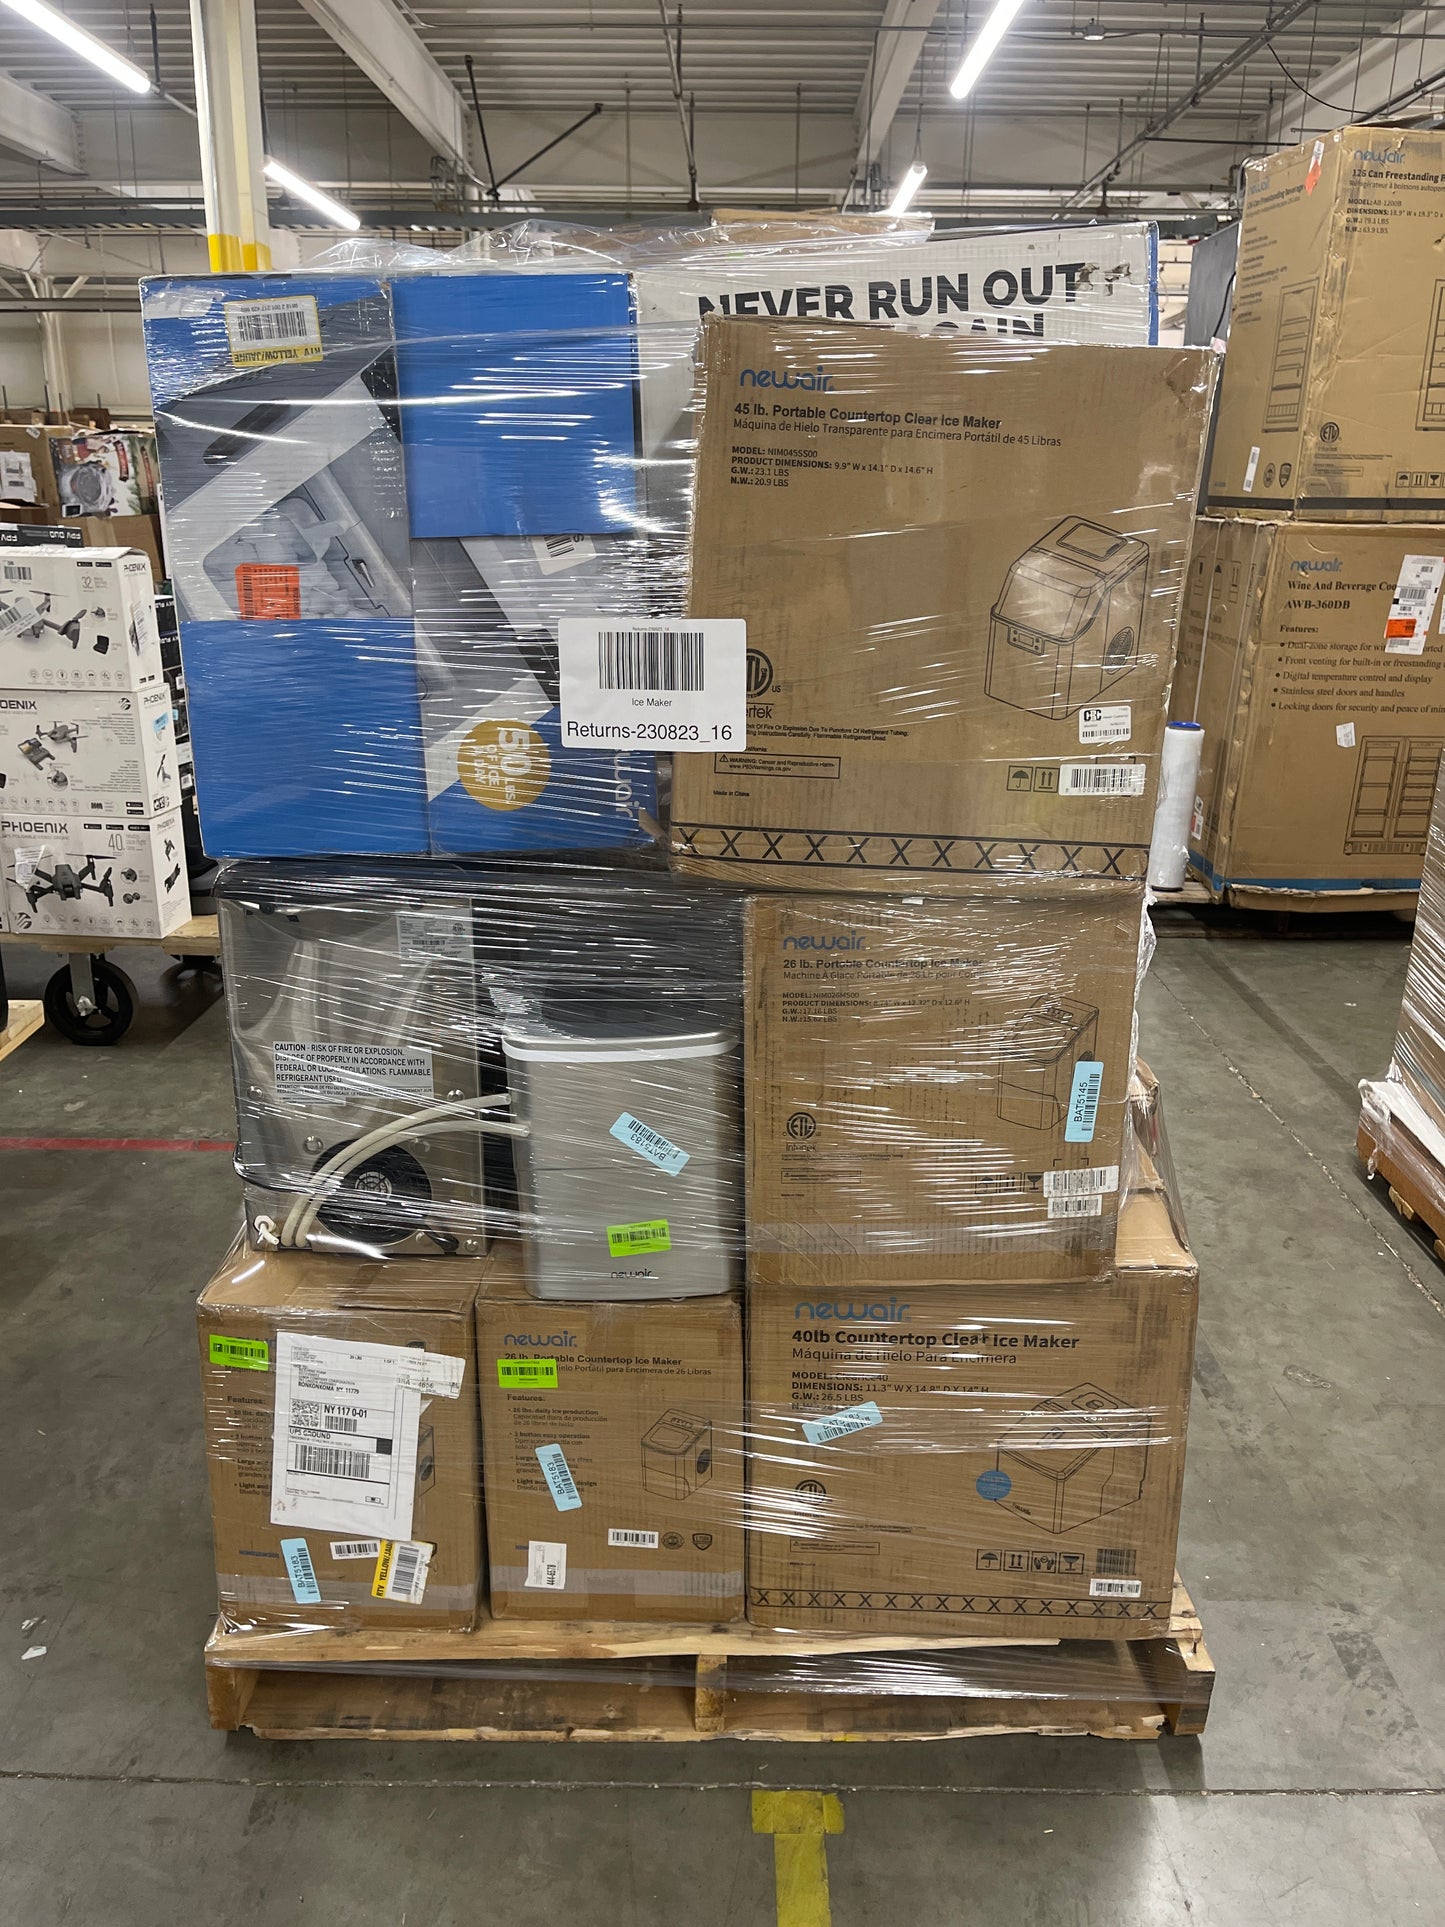 Liquidation Pallet of Compact Ice Makerss | Pallet-DDH | 230823_16